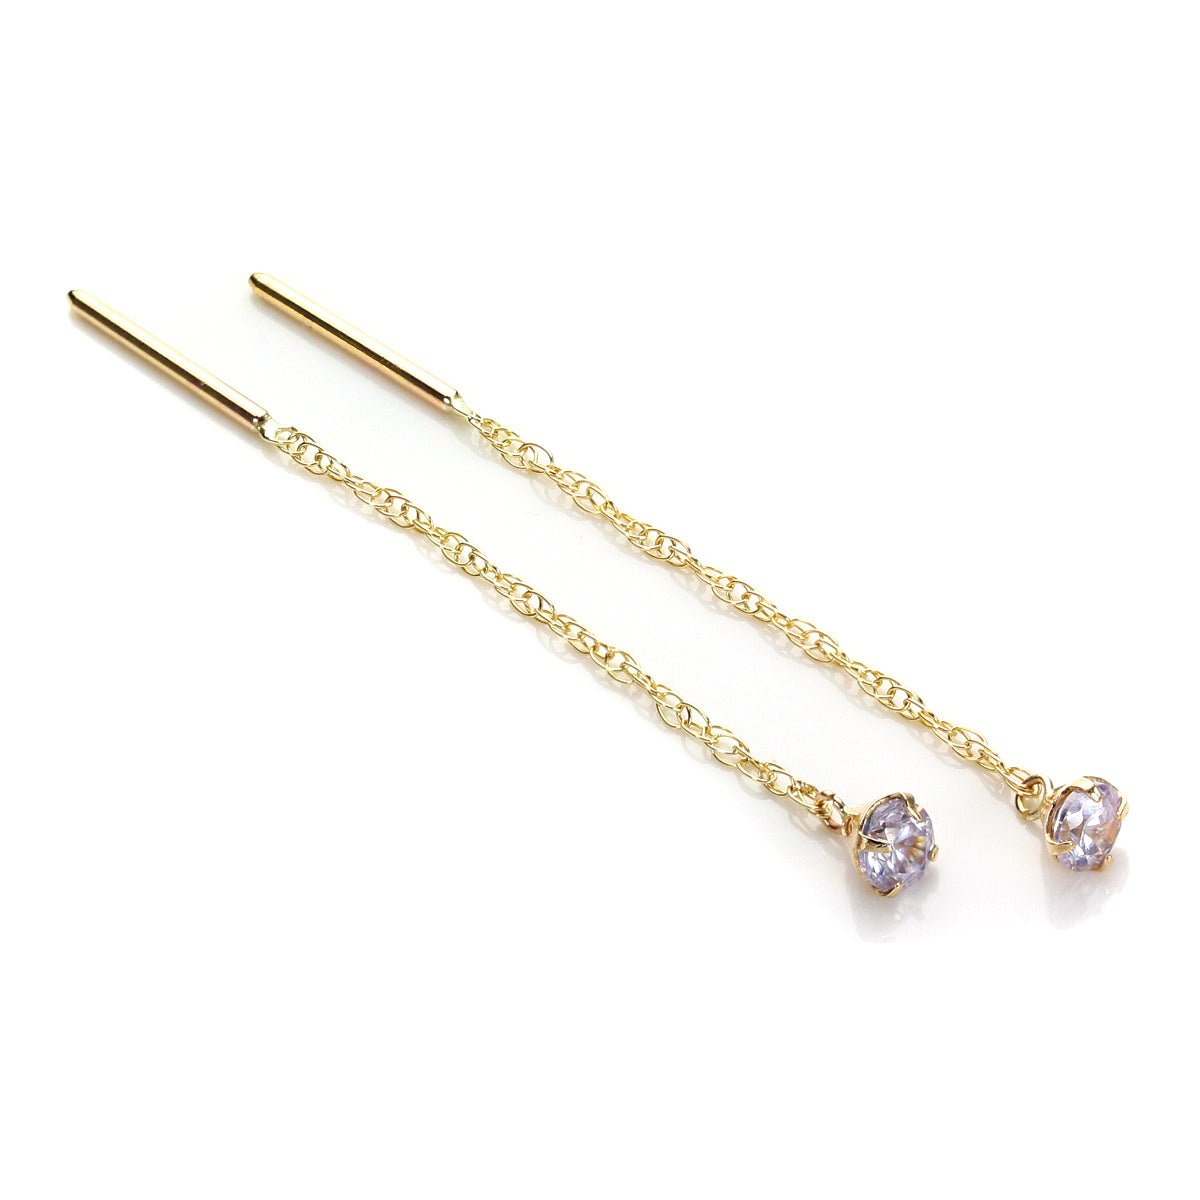 9ct Yellow Gold Lilac CZ 3.5mm Pull Through Earrings - jewellerybox